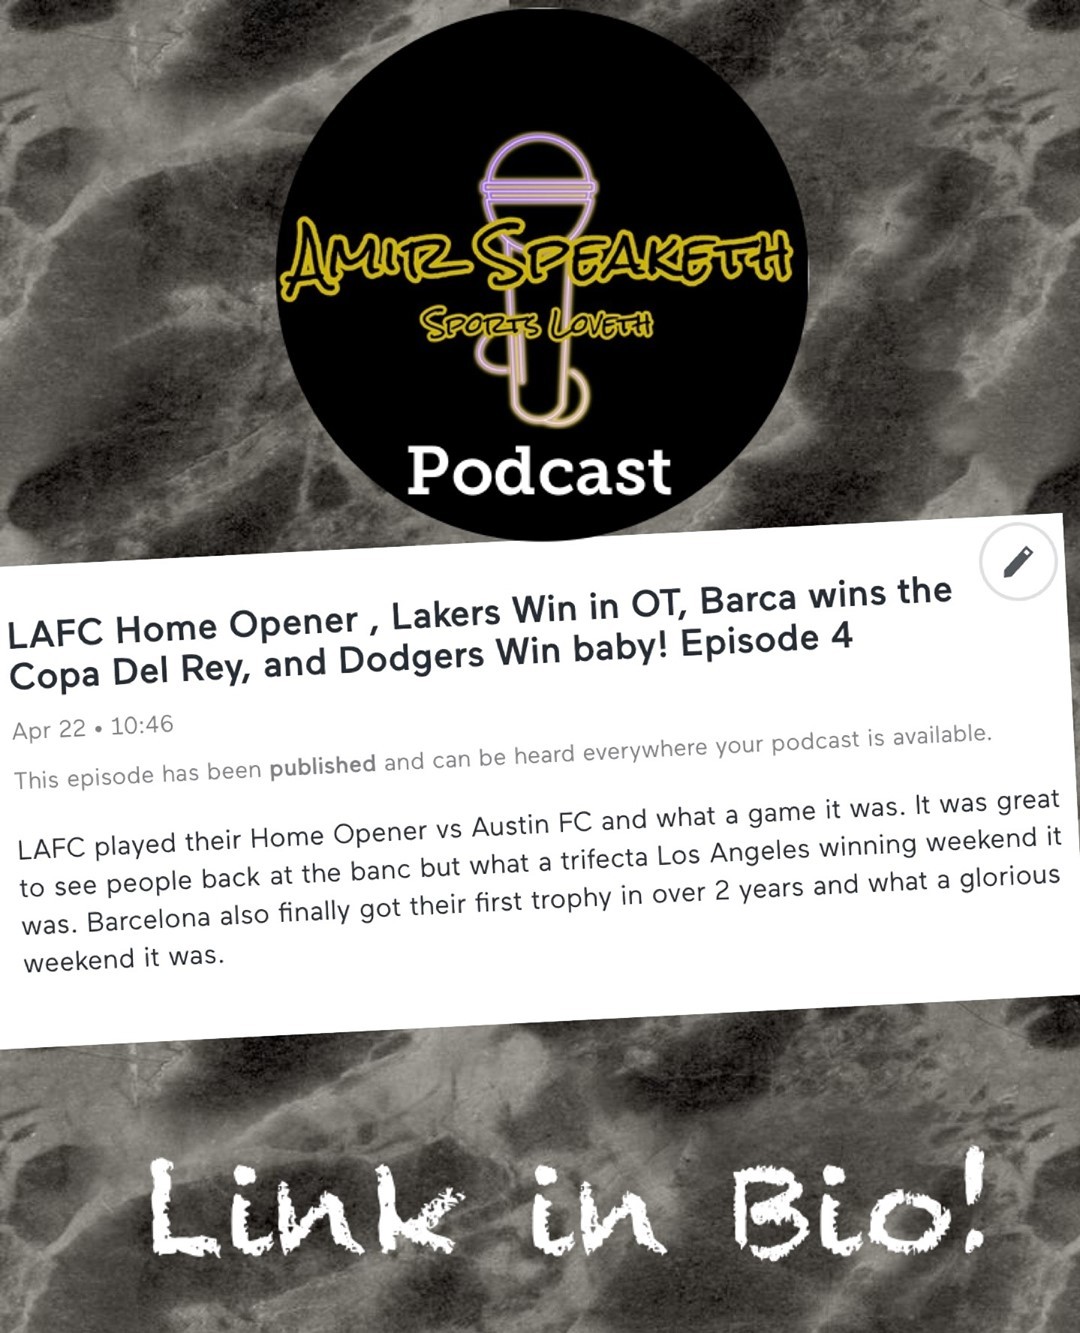 What a Los Angeles Winning Weekend! Hopefully this weekend will be the Same! If you haven't yet, I would love to invite you to check out my Recap of the LAFC home opener on my new podcast, "Amir Speaketh, Sports Loveth"...LINK IN BIO! I also ever so slightly touched on the Lakers win in OT, the Dodgers, and the Amirfecta, a Barca win in the Copa Del Rey Final! shhheeeck it out! It's a short one but a good one 🙂 More coming soon! Now on Spotify and Anchor.fm⁠
.⁠
.⁠
.⁠
allclub